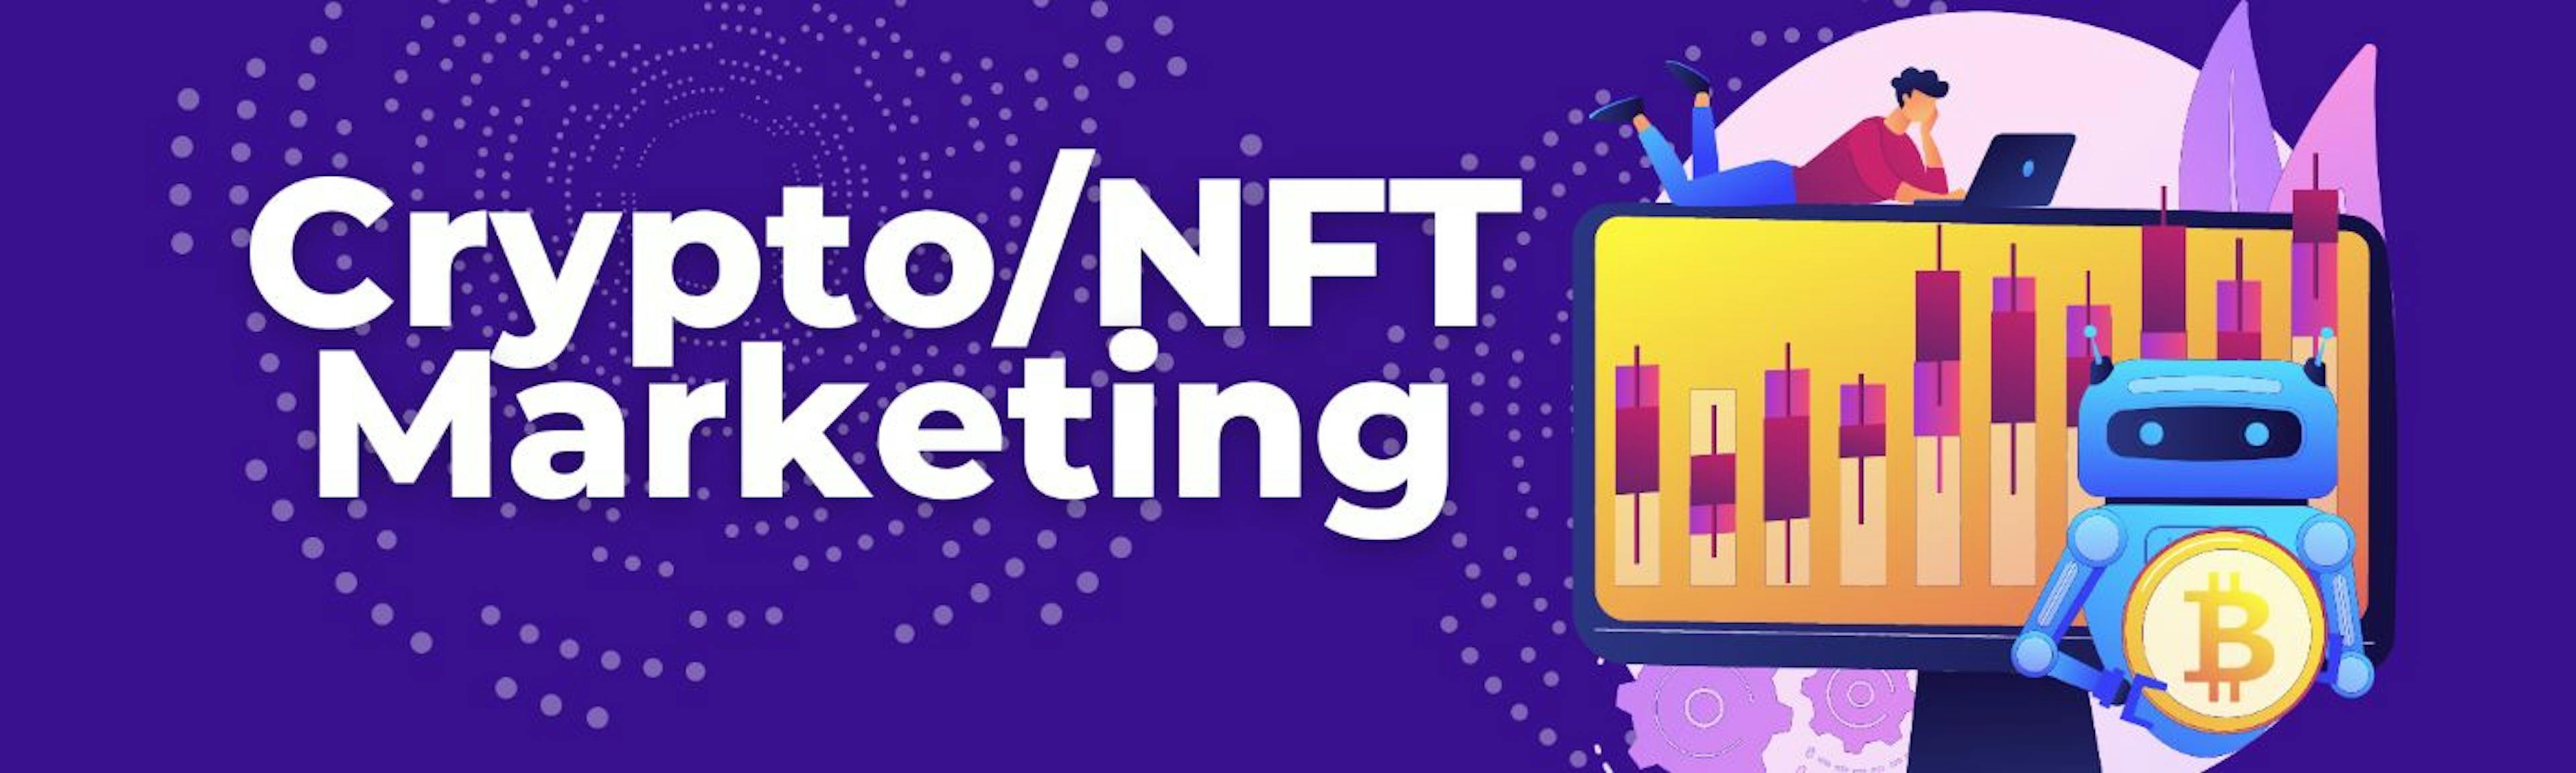 featured image - Marketing Your Crypto/NFT Tokens